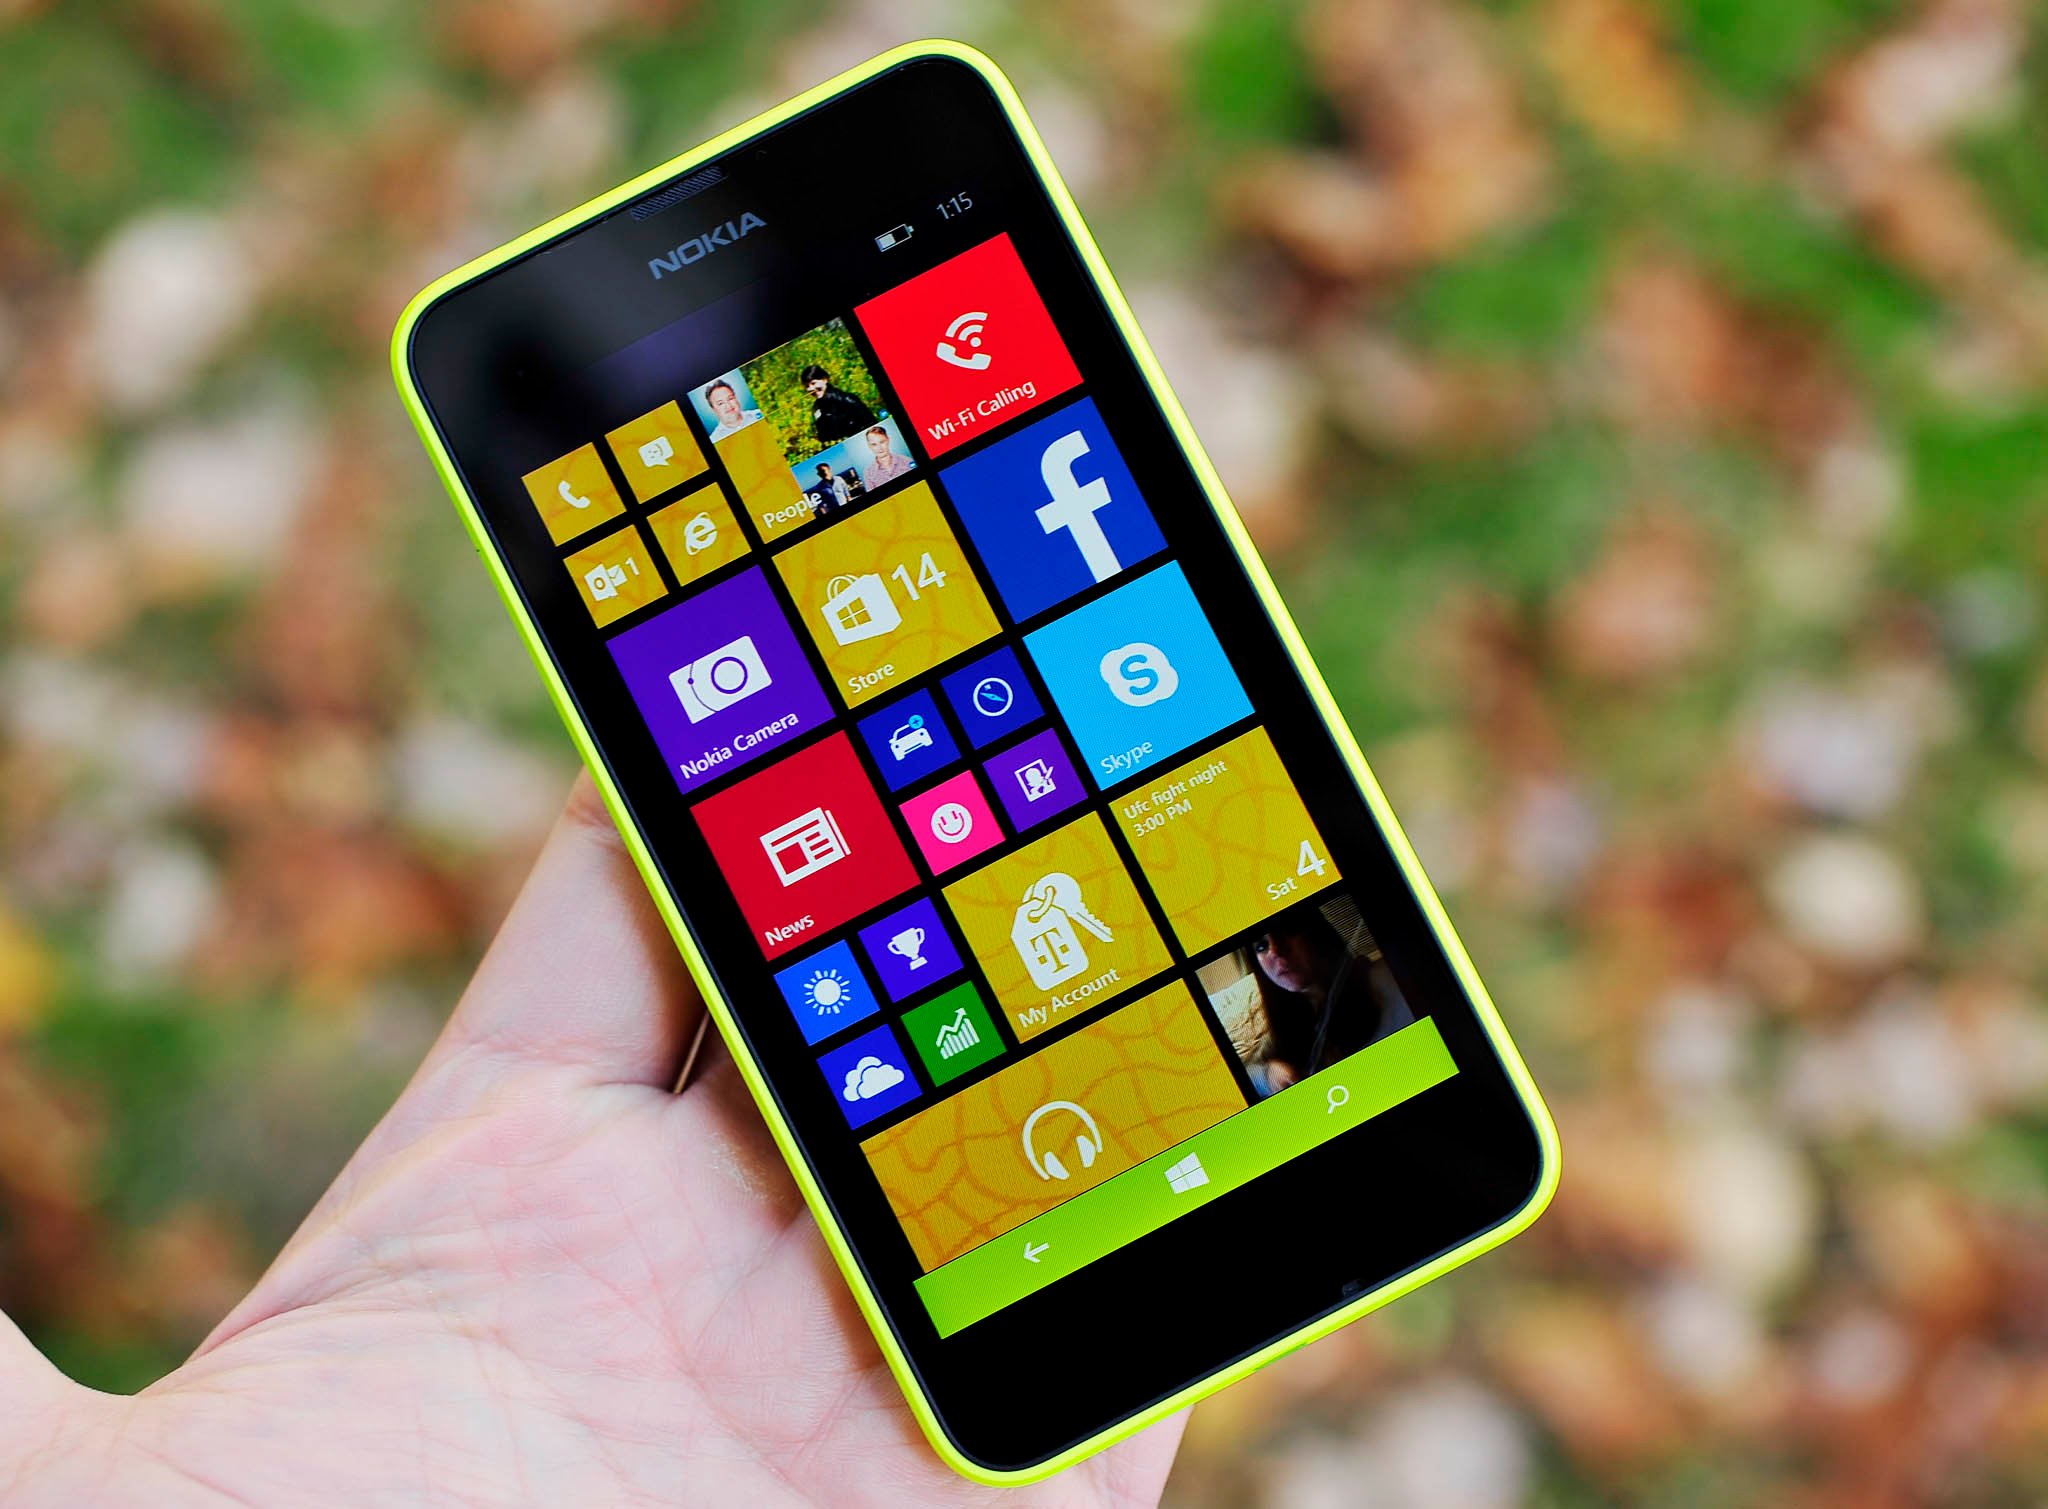 Deal Alert: Snag the AT&T Lumia 635 for just under $30 from Walmart